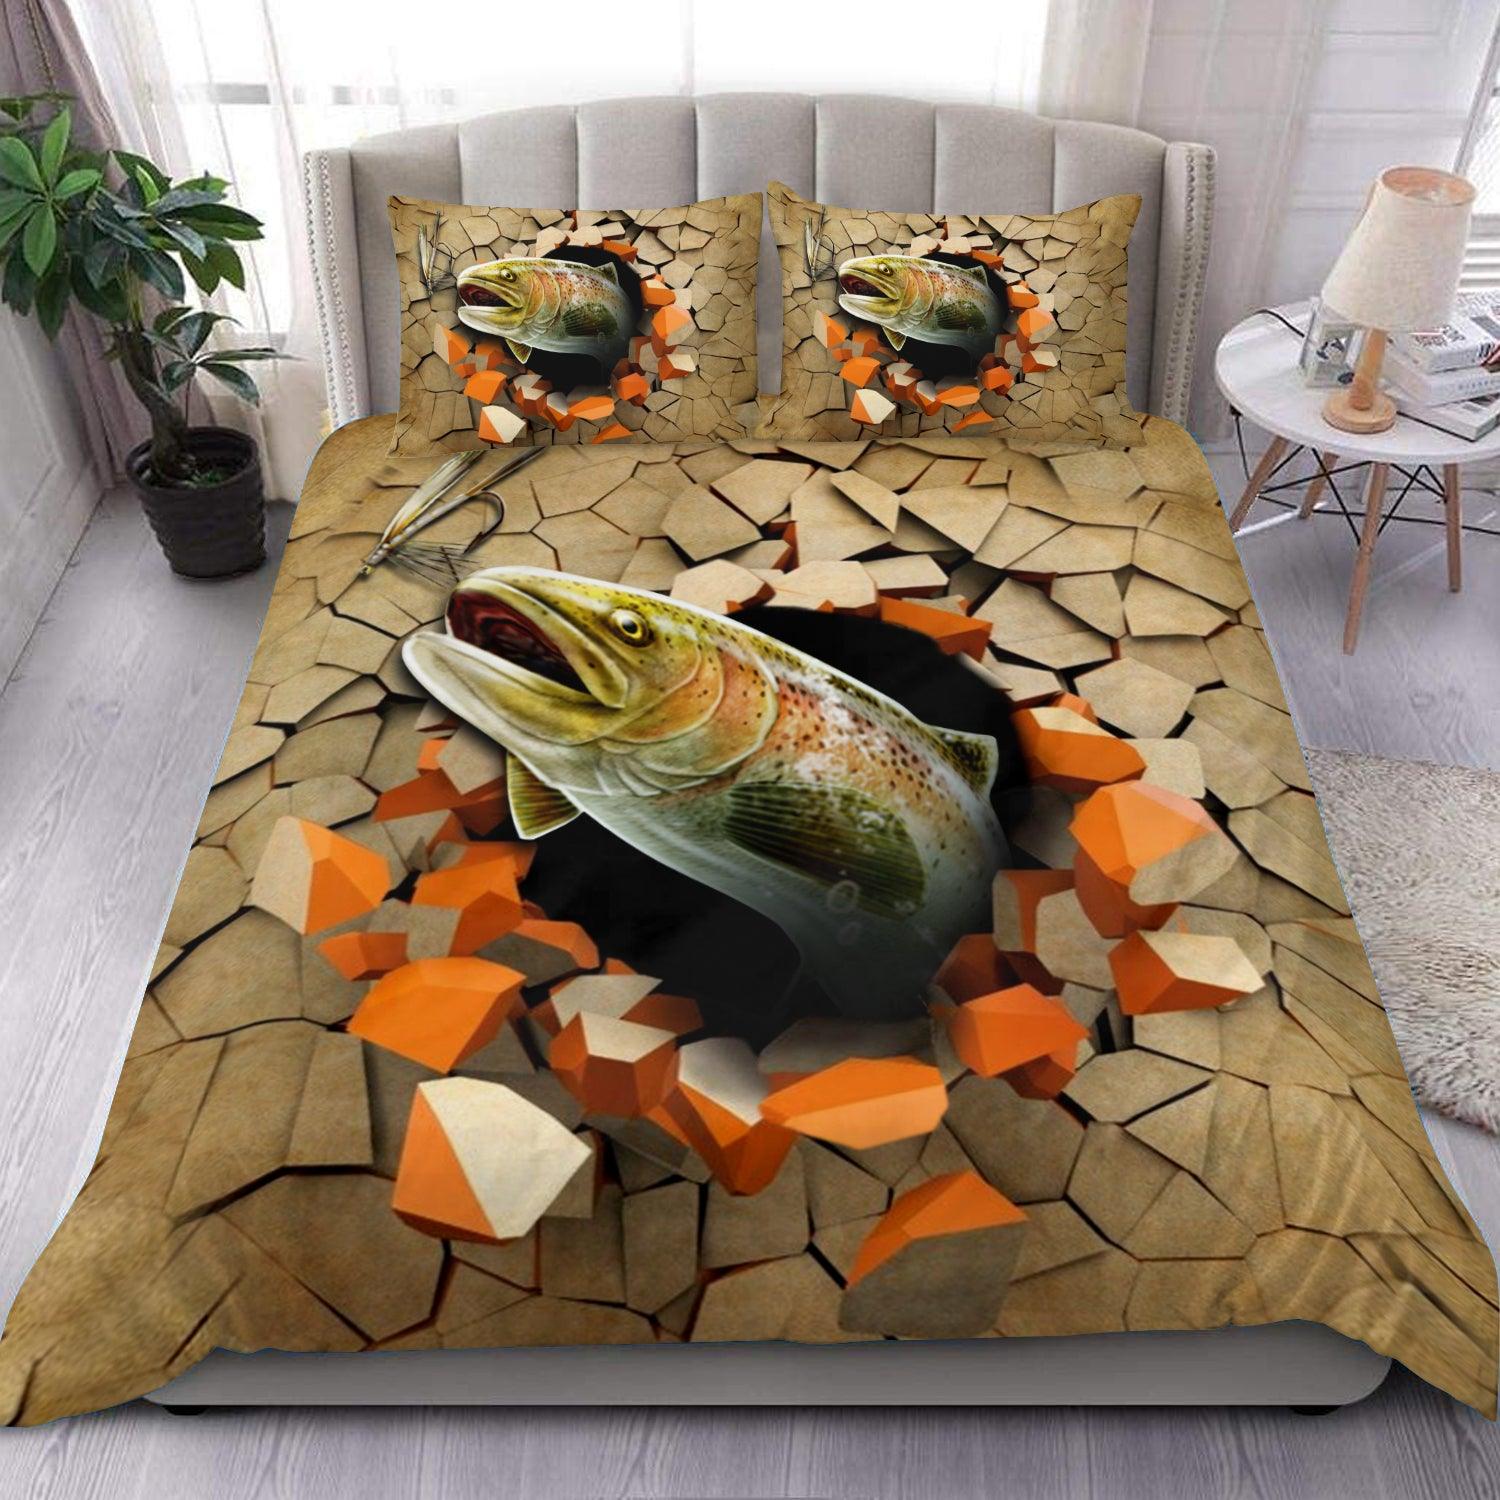 Fishing Bedding Set, Gift for Fishing Lovers - BD167PA06 - BMGifts